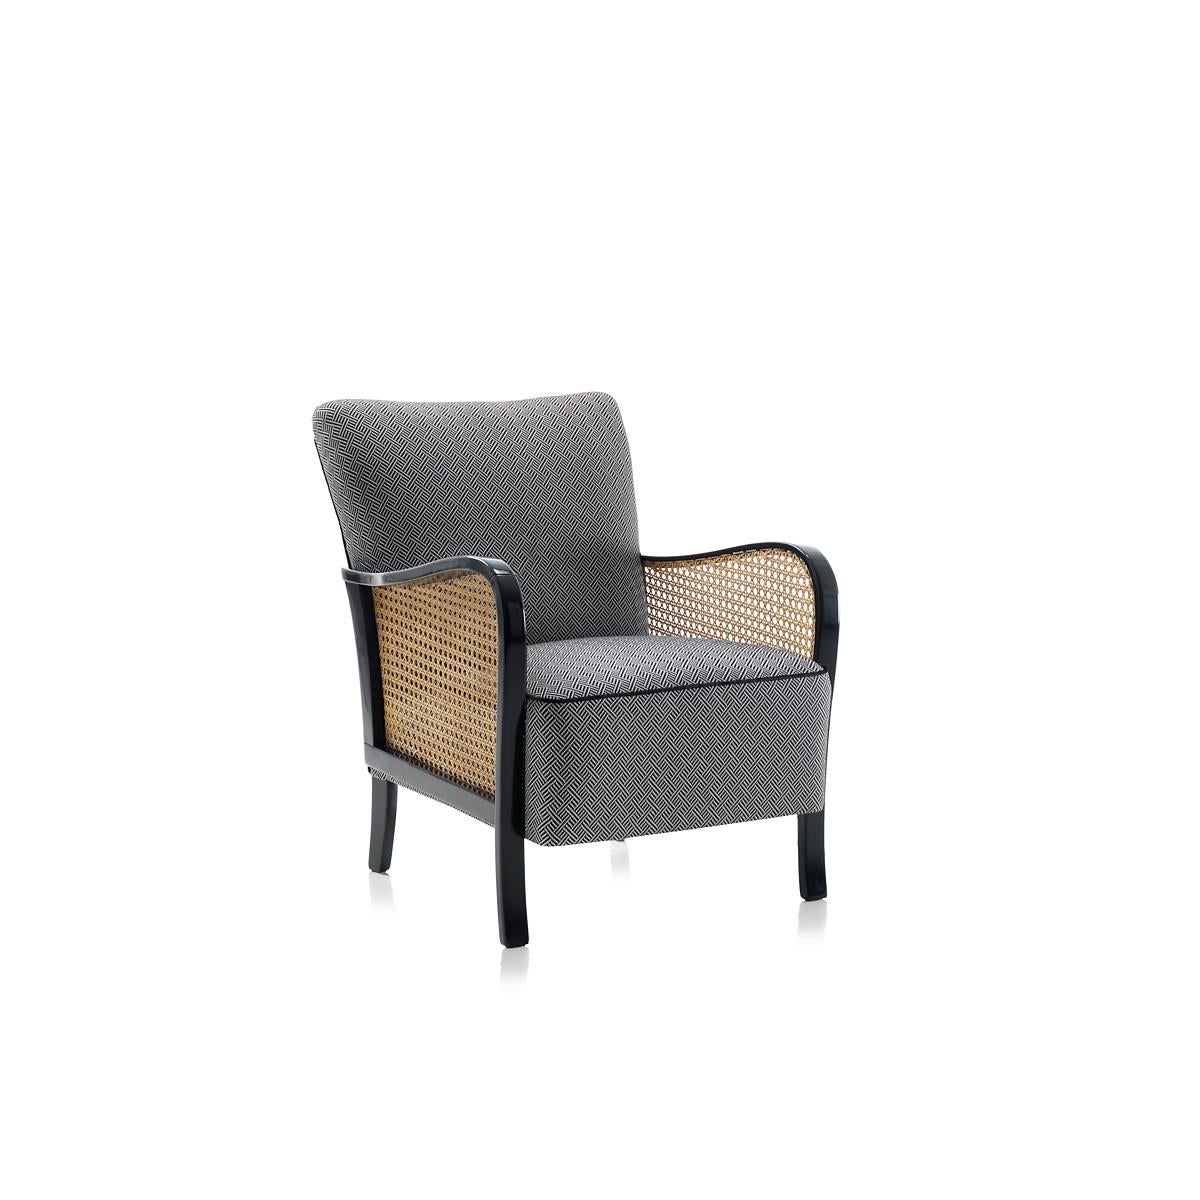 Modernize your space with the curves of this midcentury inspired armchair set. It features special handwoven Vienna rattan decoration, a French lacquered frame in glossy black creates a simple, sharp and modern expression. Upholstered in COM,